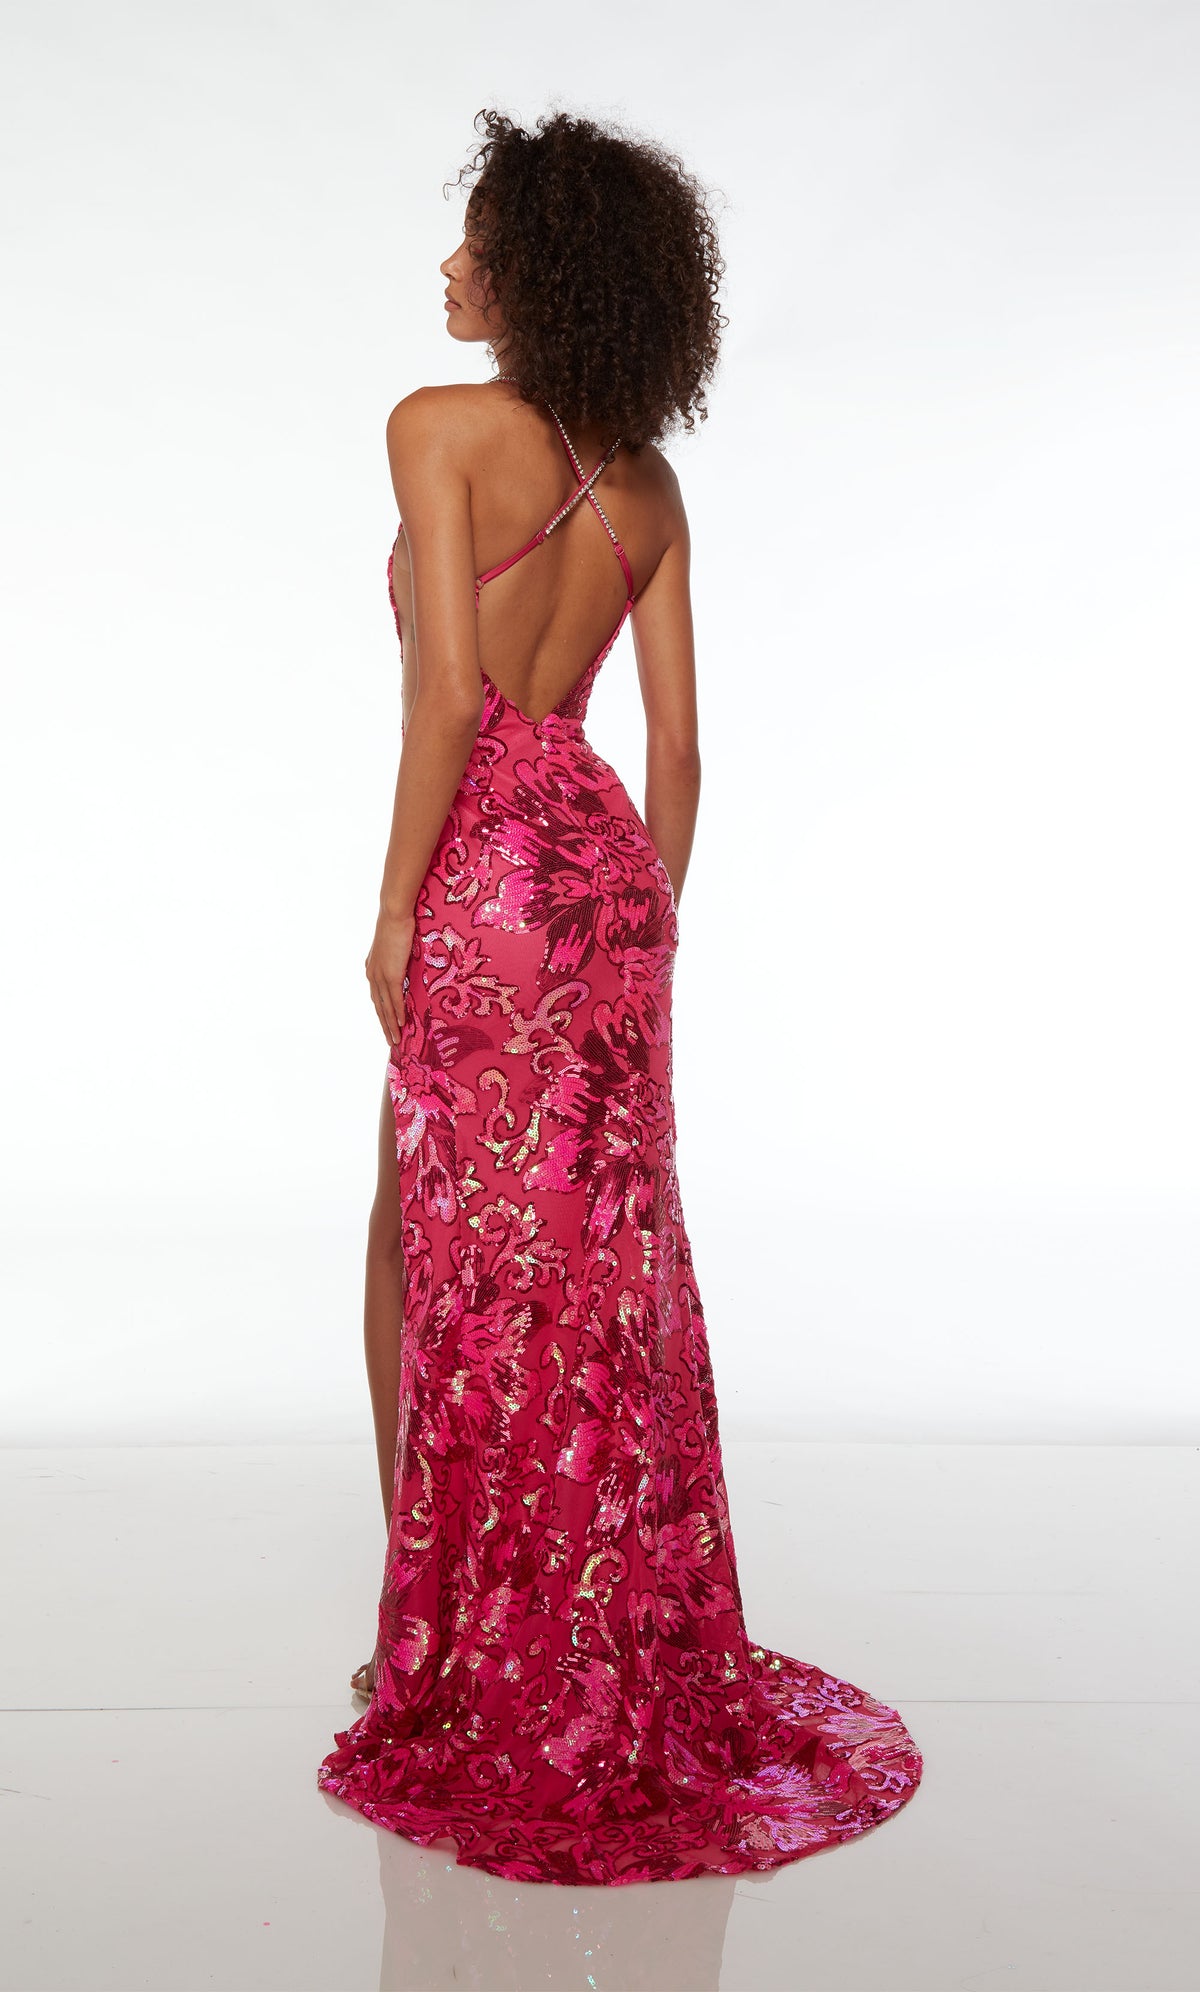 Pink mermaid dress, floral sequins, plunging neckline, high slit, crisscross back, stylish train—an captivating and glamorous ensemble.